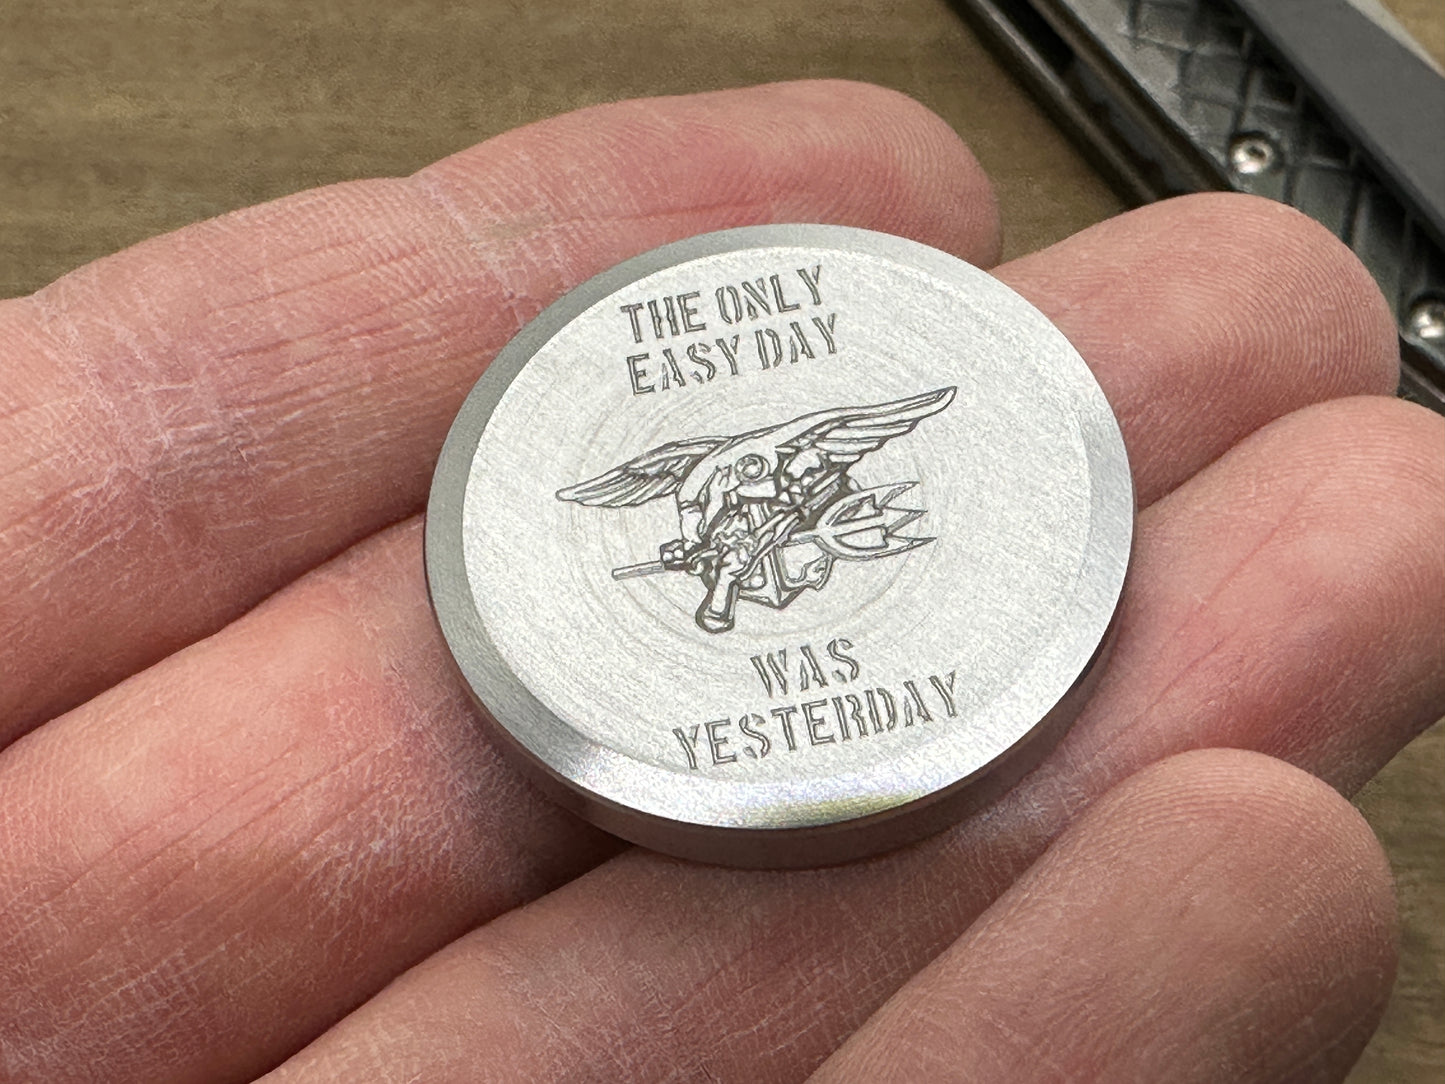 Molybdenum Worry Coin "The only easy day was yesterday.” U.S. Navy SEALs